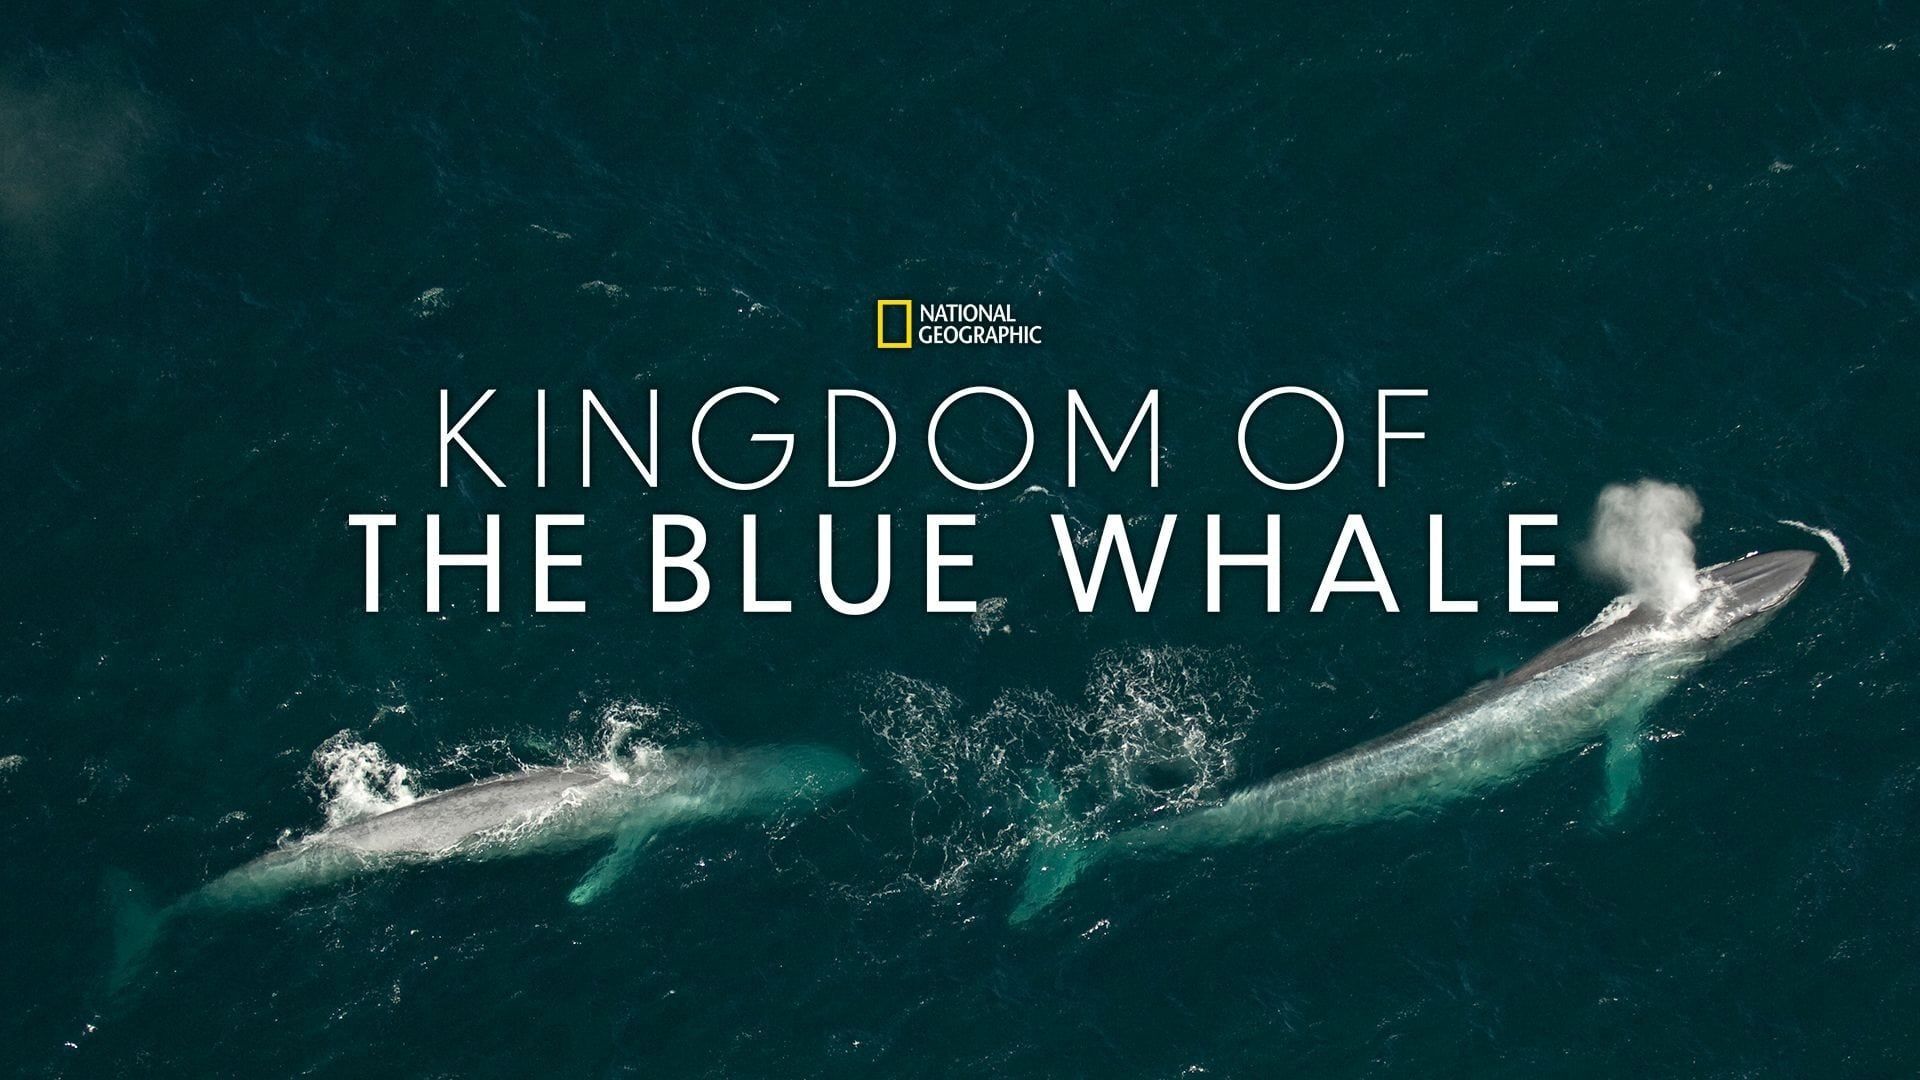 Kingdom of the Blue Whale background